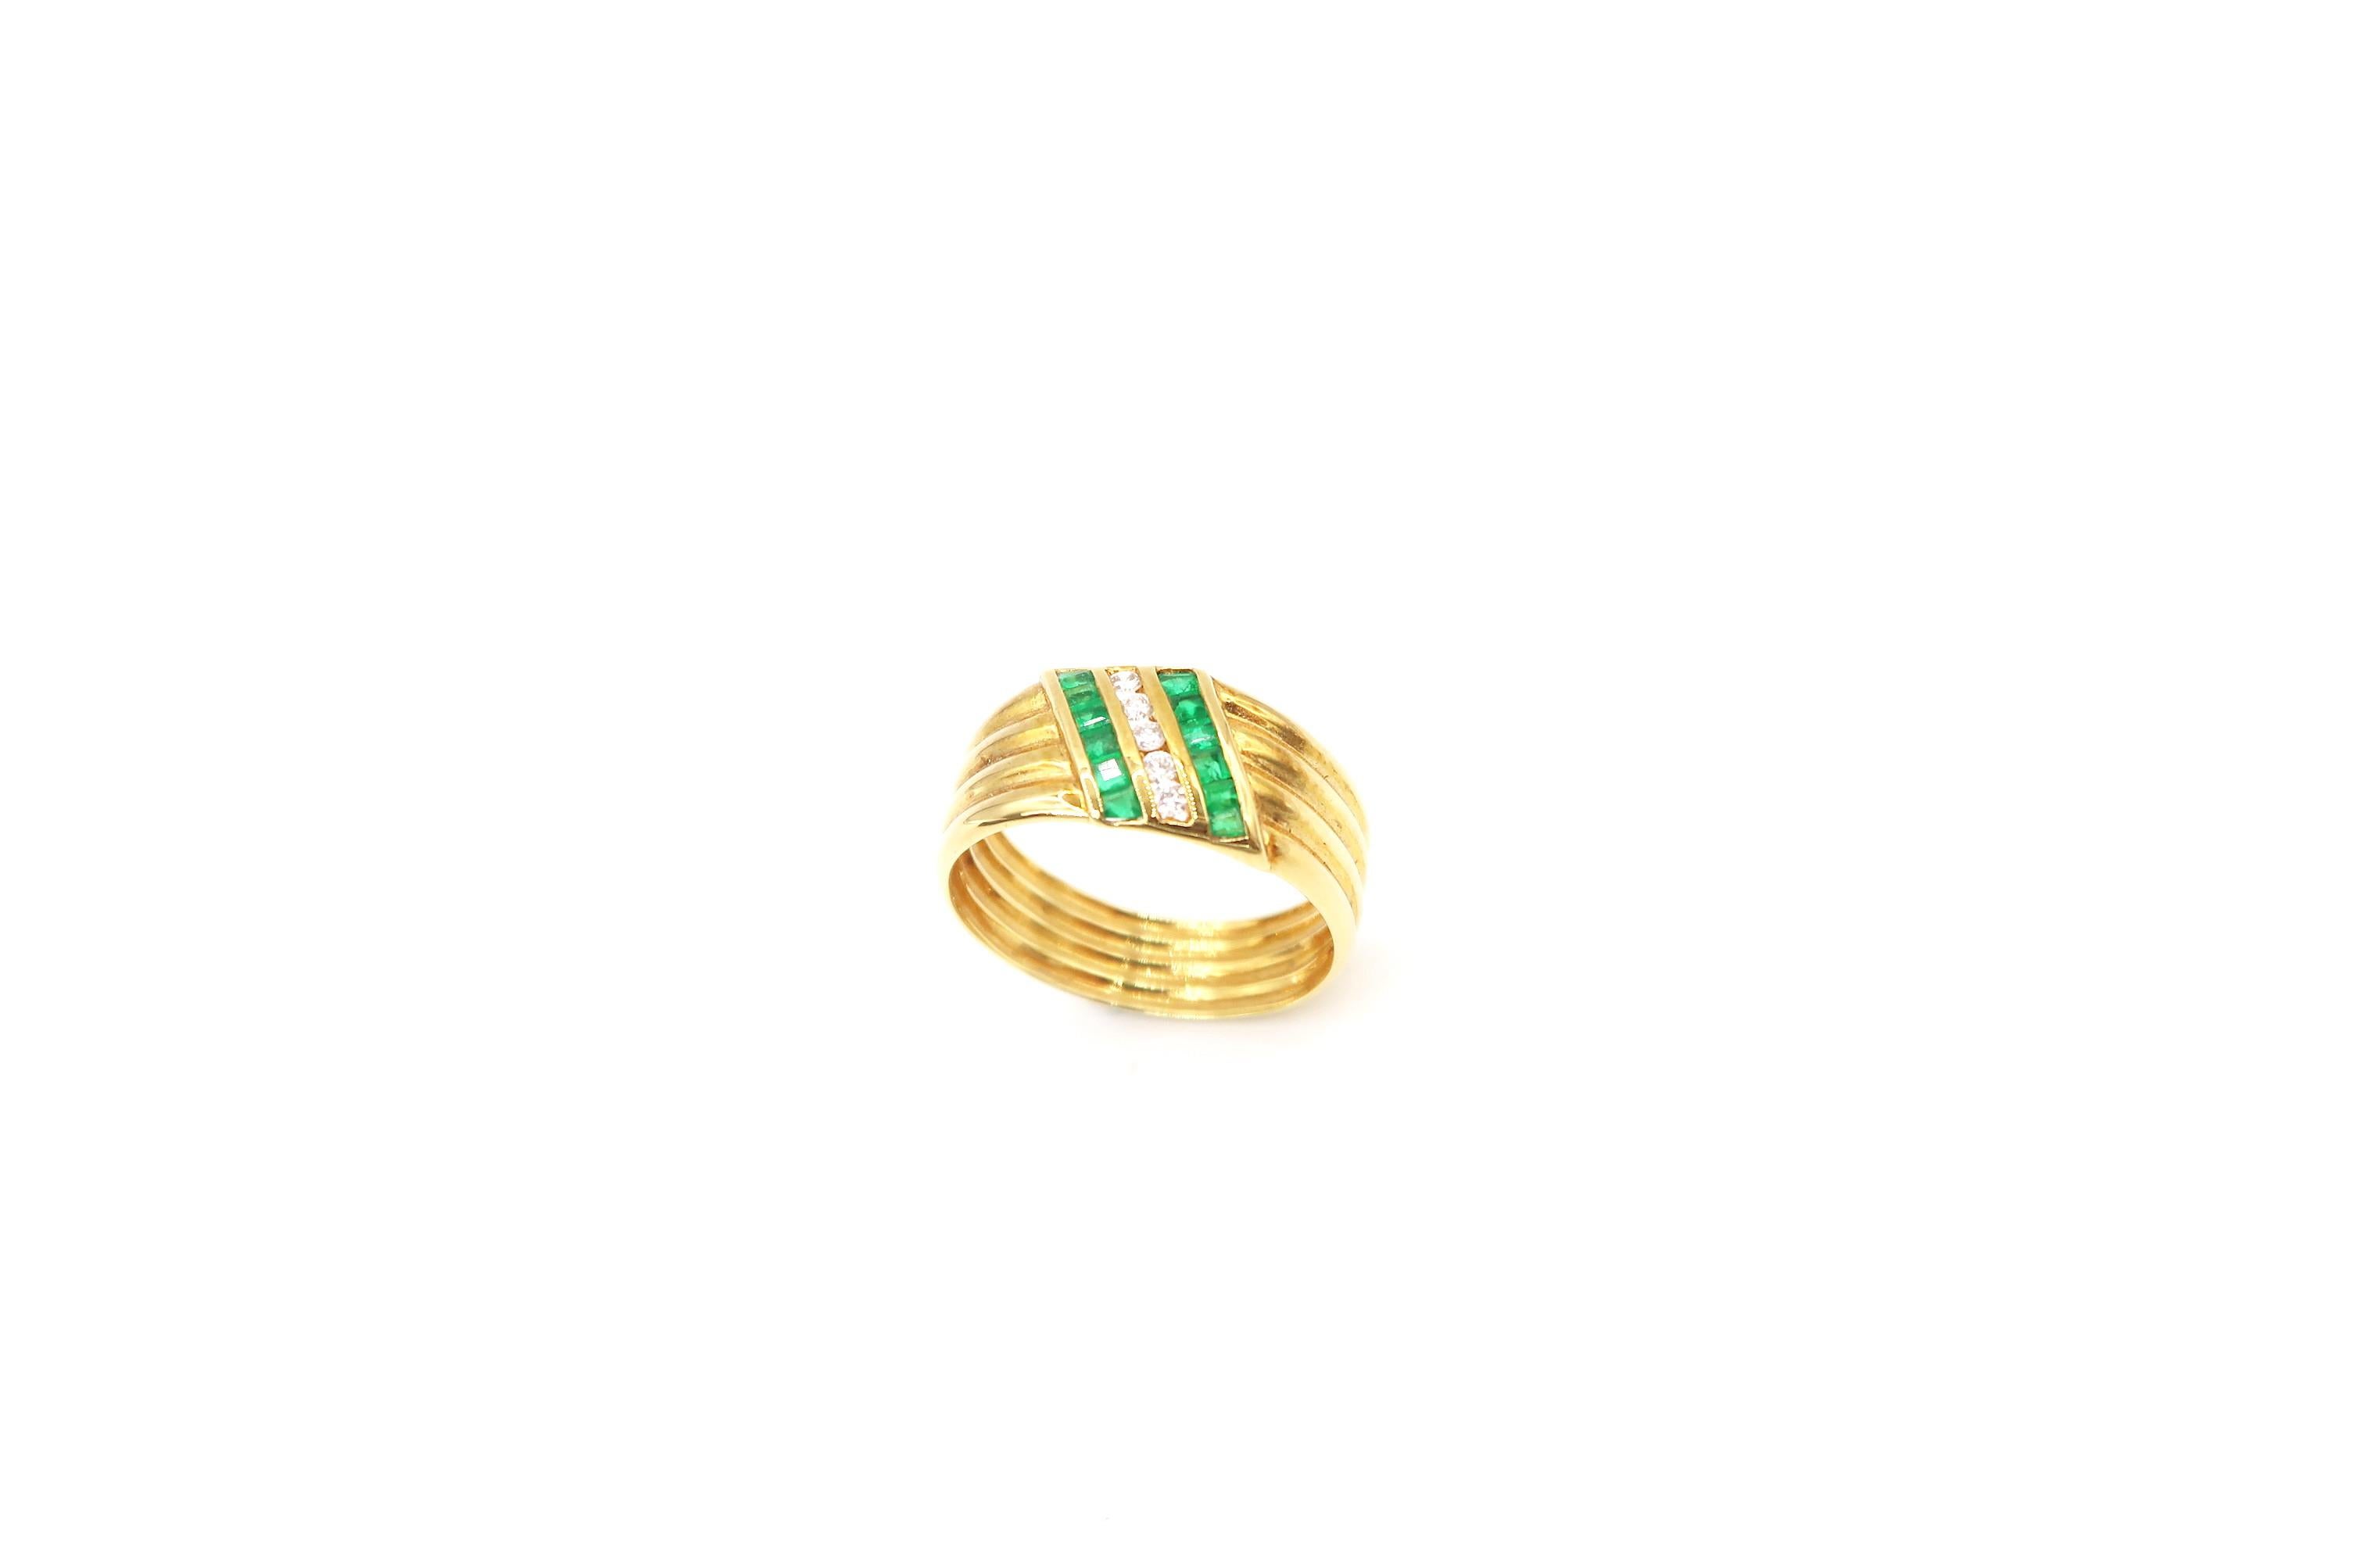 Diamond and Emerald Ribbed 18 Karat Yellow Gold Band Ring

Please let us know upon checkout if you wish to have the ring resized.

Ring size: 54

Emerald: 0.38ct.
Diamond: 0.10ct.
Gold: 18K 4.56g.